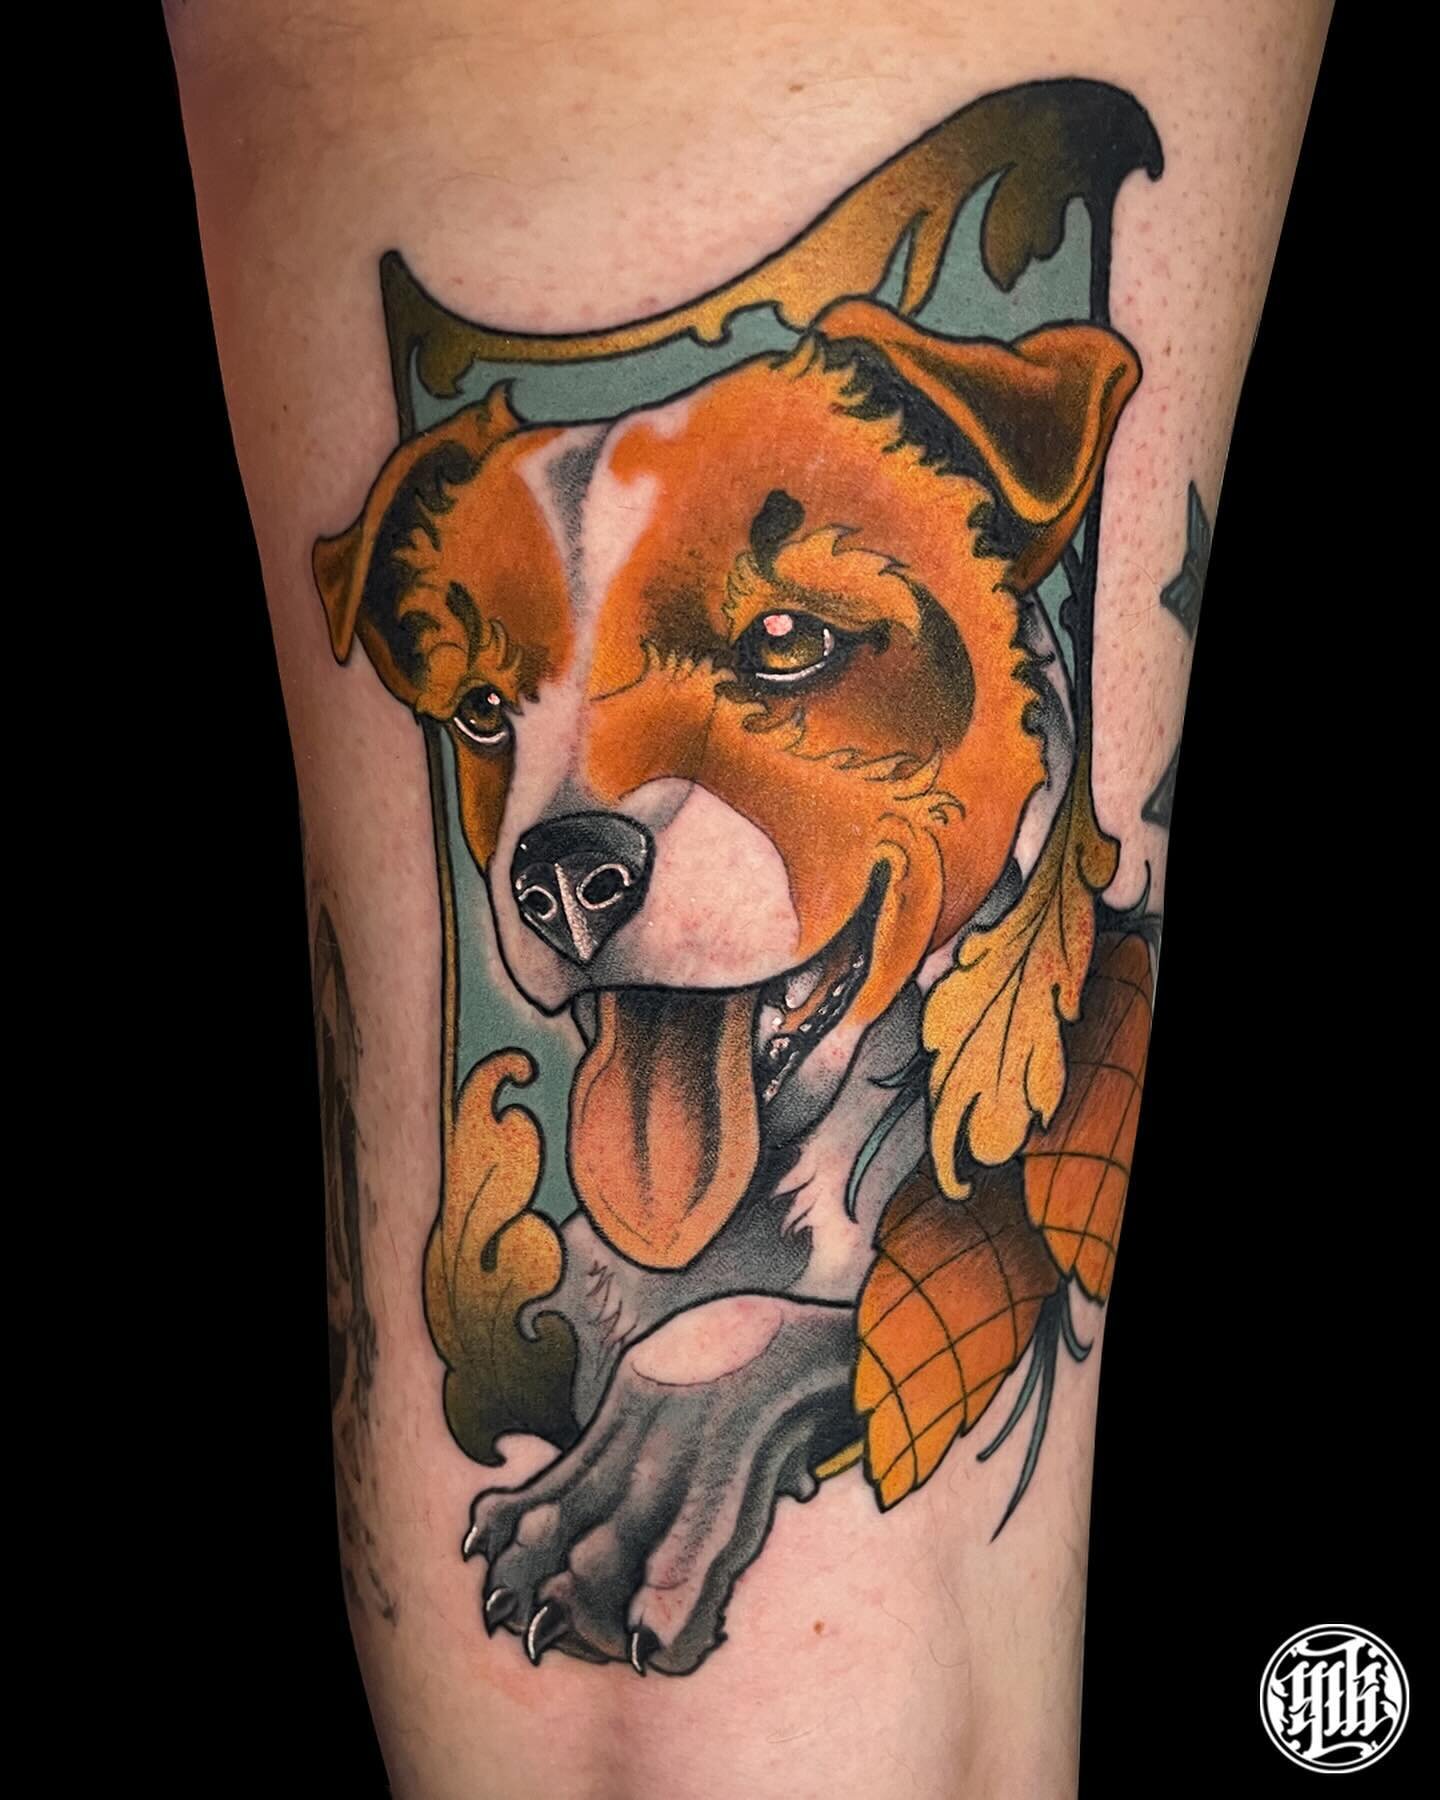 🍁 Commemorative Dog portrait for @antonin_lipp 
Thank you for trusting me with this meaningful tattoo 🙏🐒🙏

Swipe to see the video 

🌗 Booking open for April 🌓
Next Guest : 
&mdash;&mdash;&mdash;&mdash;&mdash;&mdash;&mdash;&mdash;&mdash;&mdash;&